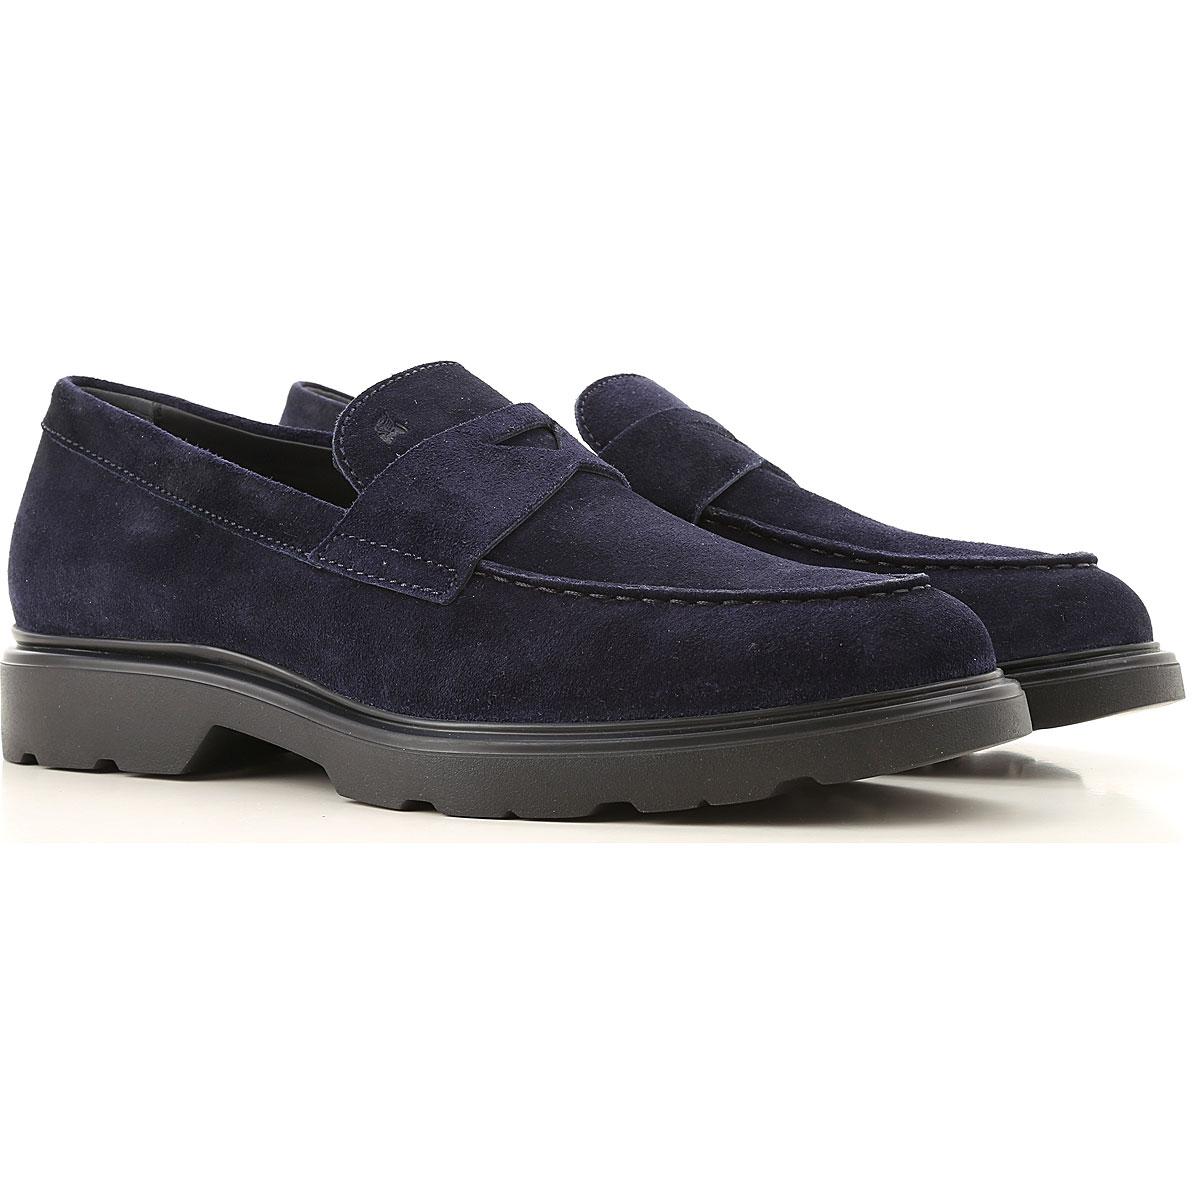 Hogan Suede Loafers For Men in Midnight Blue (Blue) for Men - Lyst